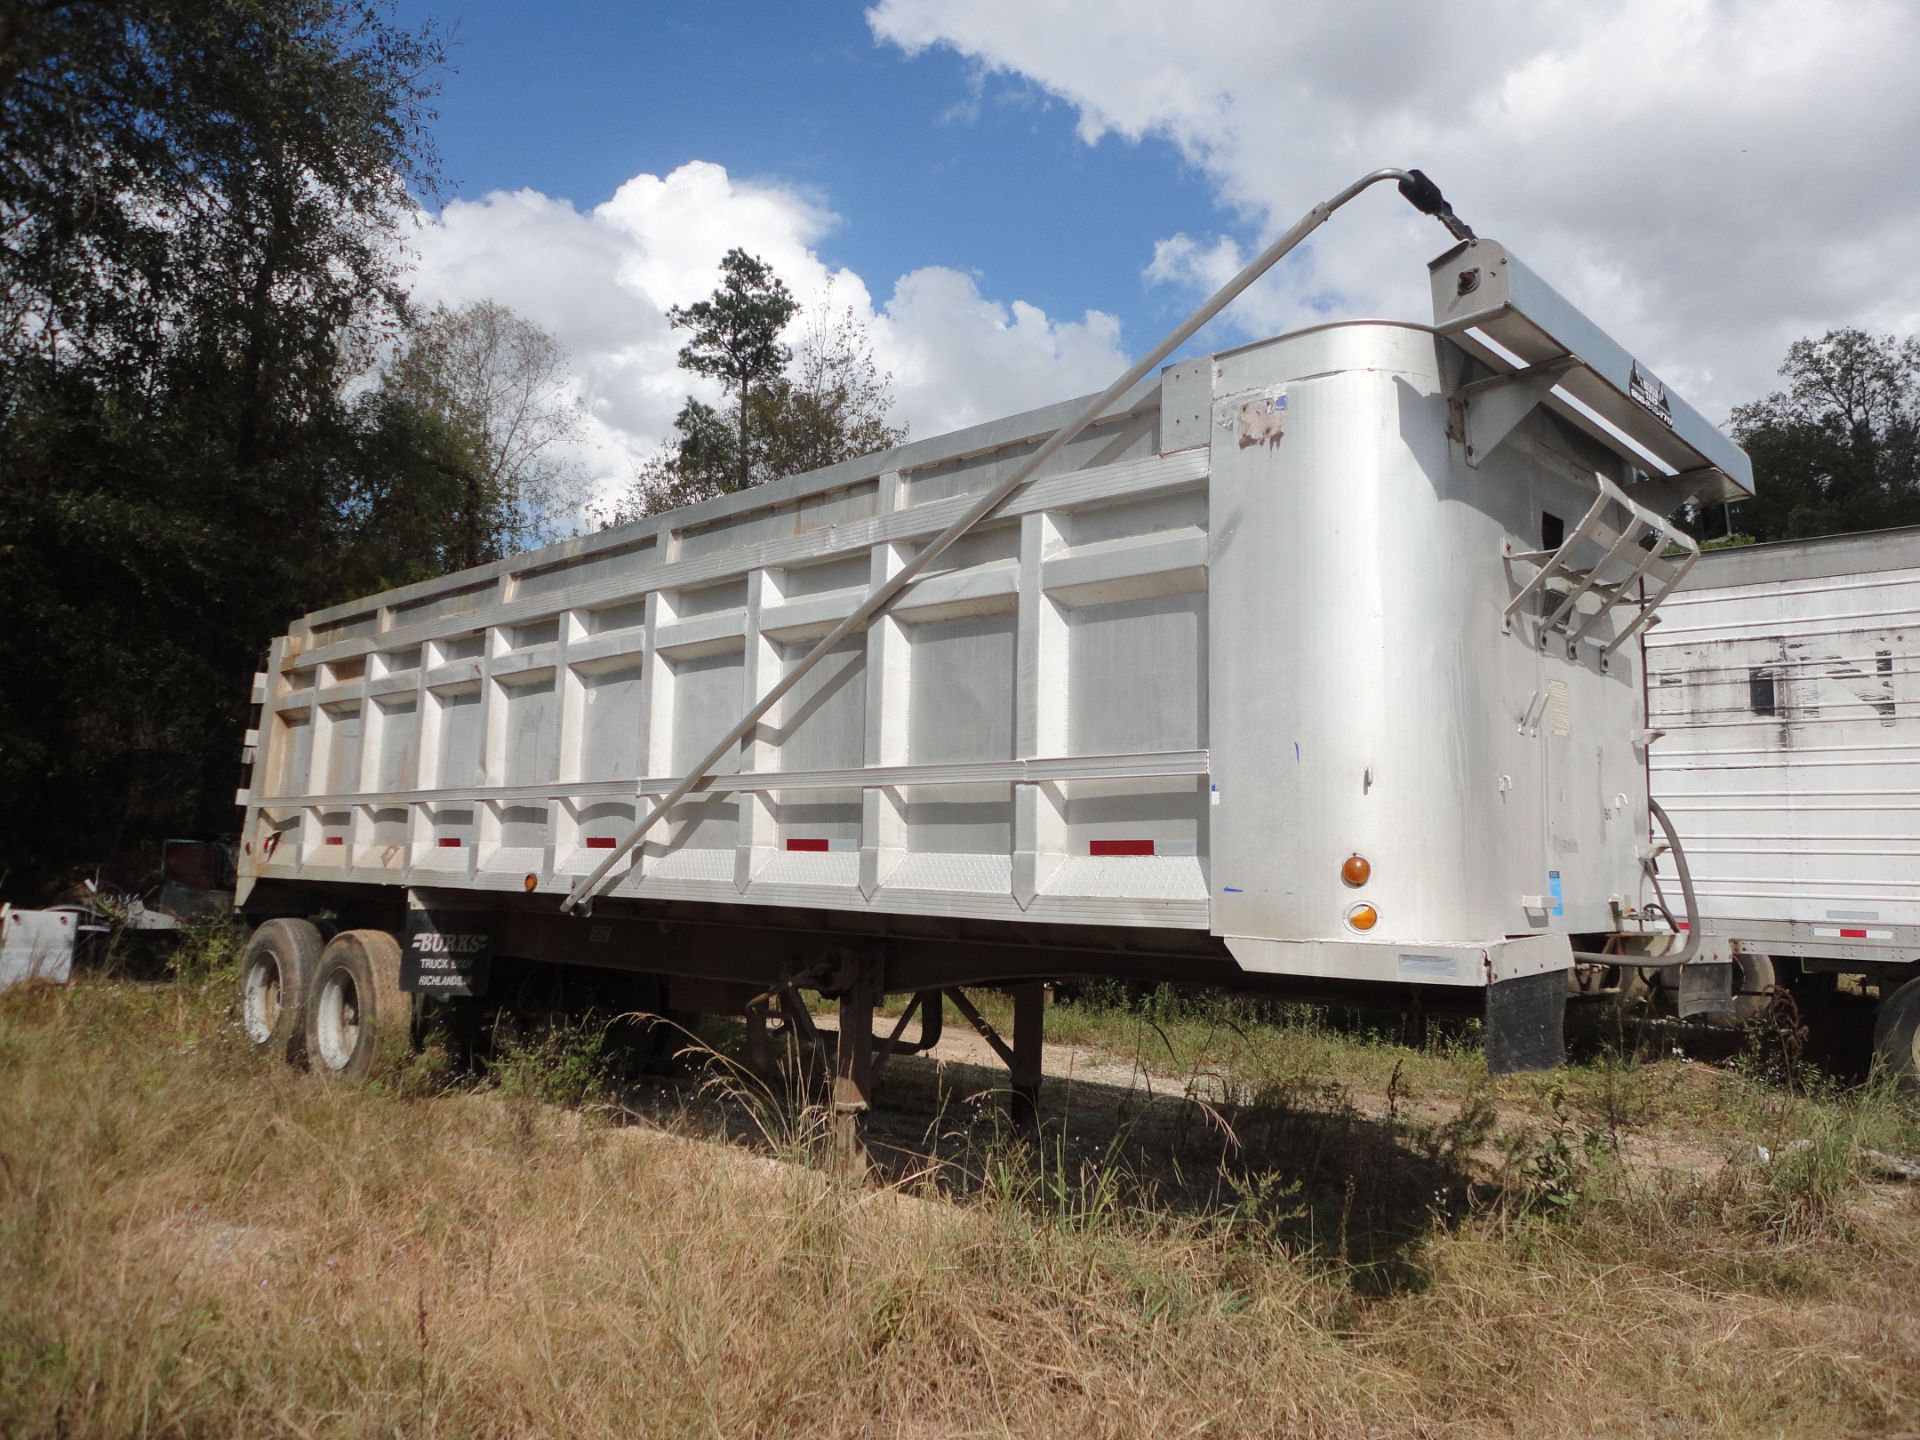 96" WIDE X 30' LONG X 75" HIGH SIDES EAST STEEL FRAME ALUMINUM BED TANDEM AXLE HYDRAULIC DUMP